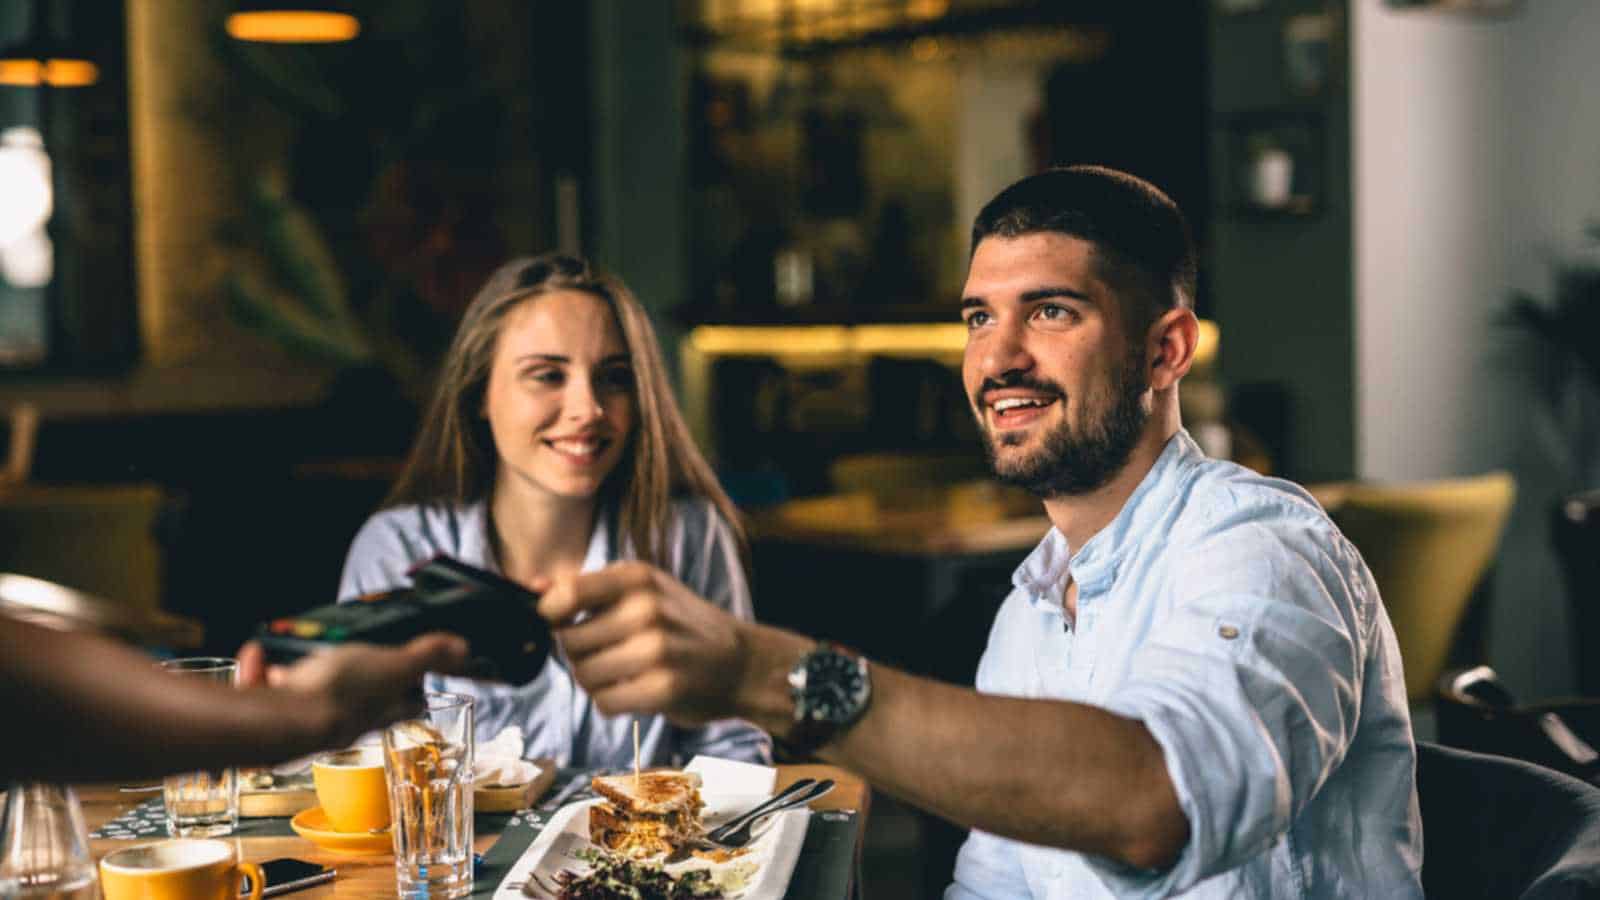 Couples at restaurant